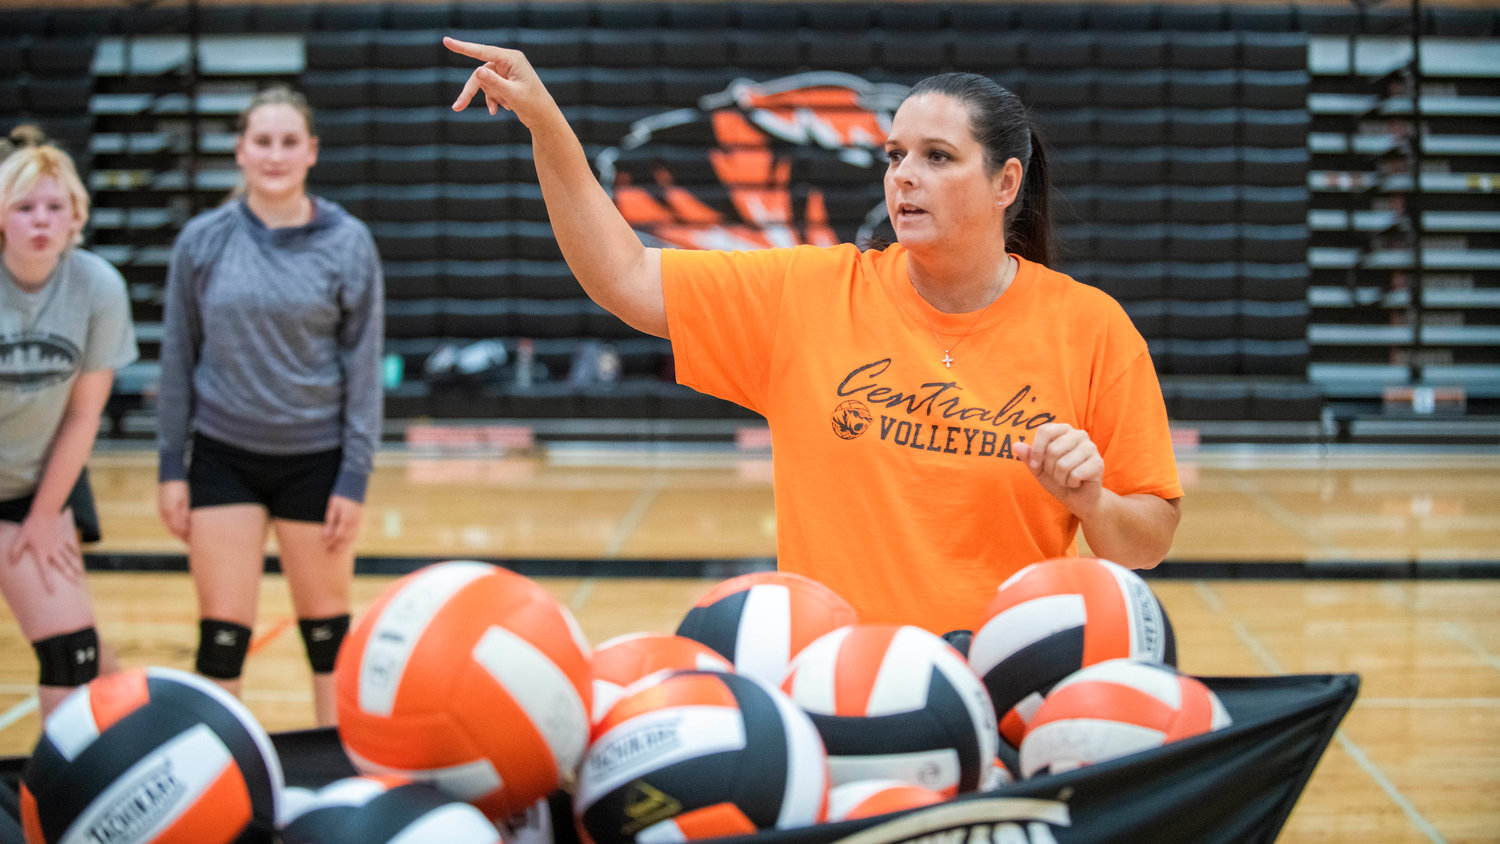 Marti Smith, volleyball coach at Centralia High School, points and directs athletes during practice Friday afternoon.